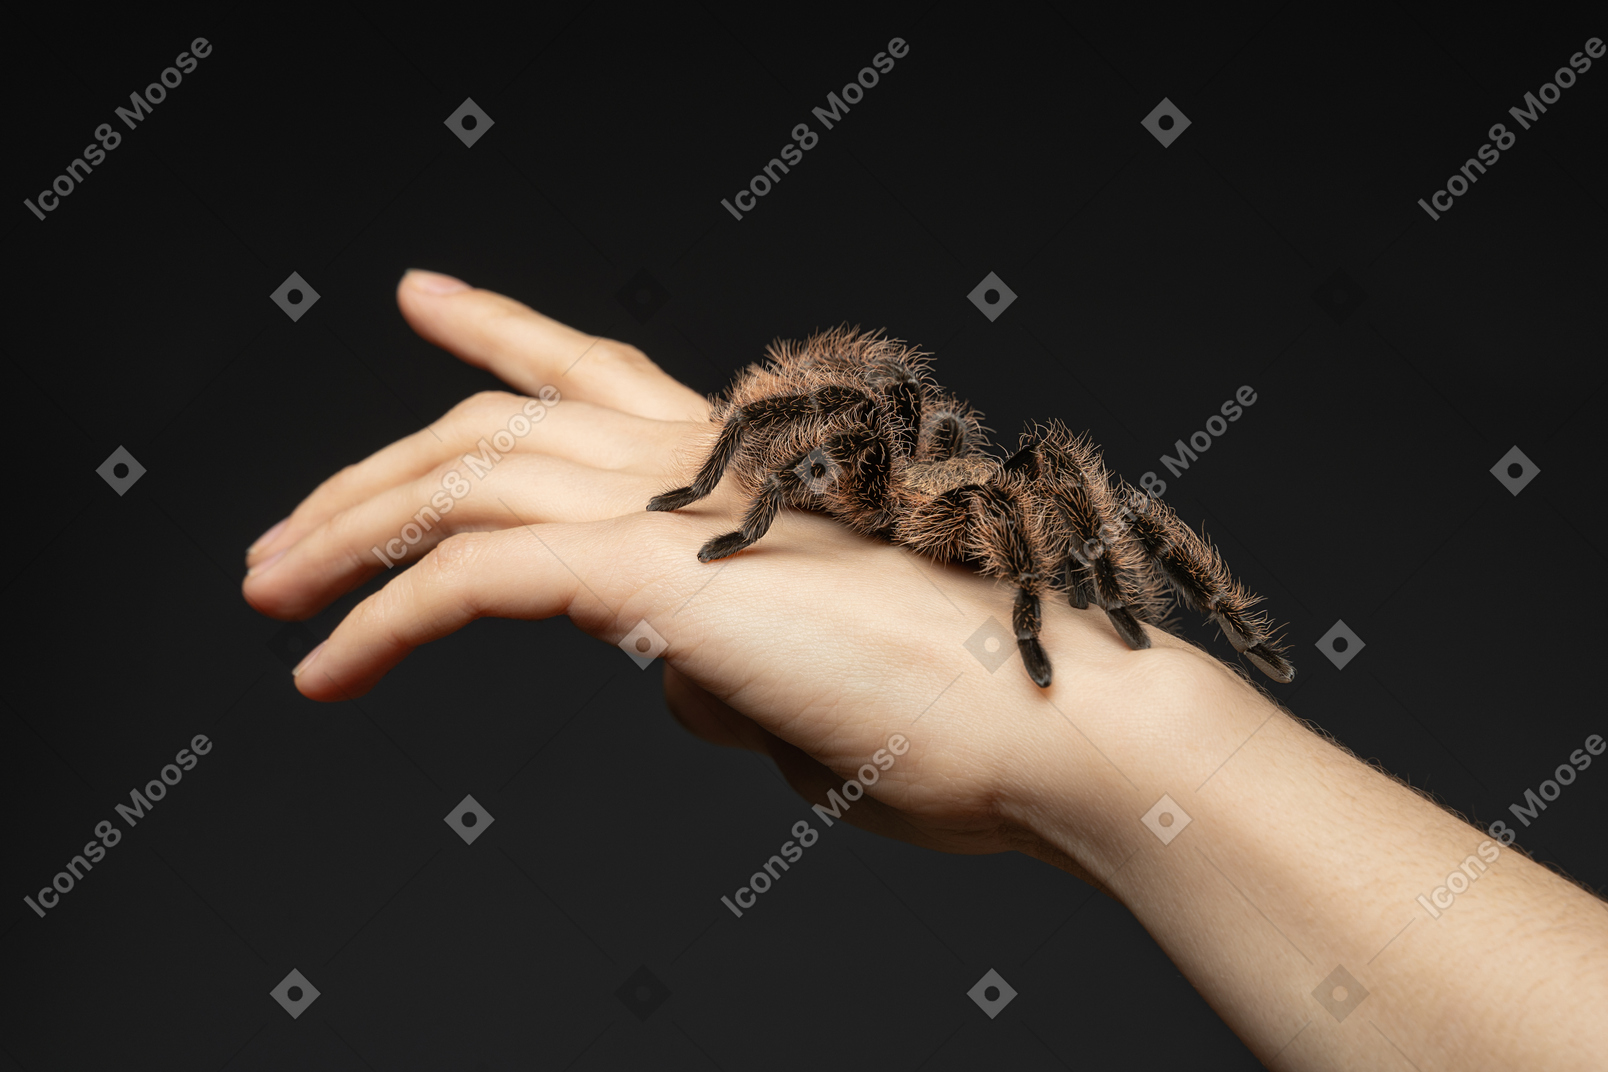 Spider on a human hand